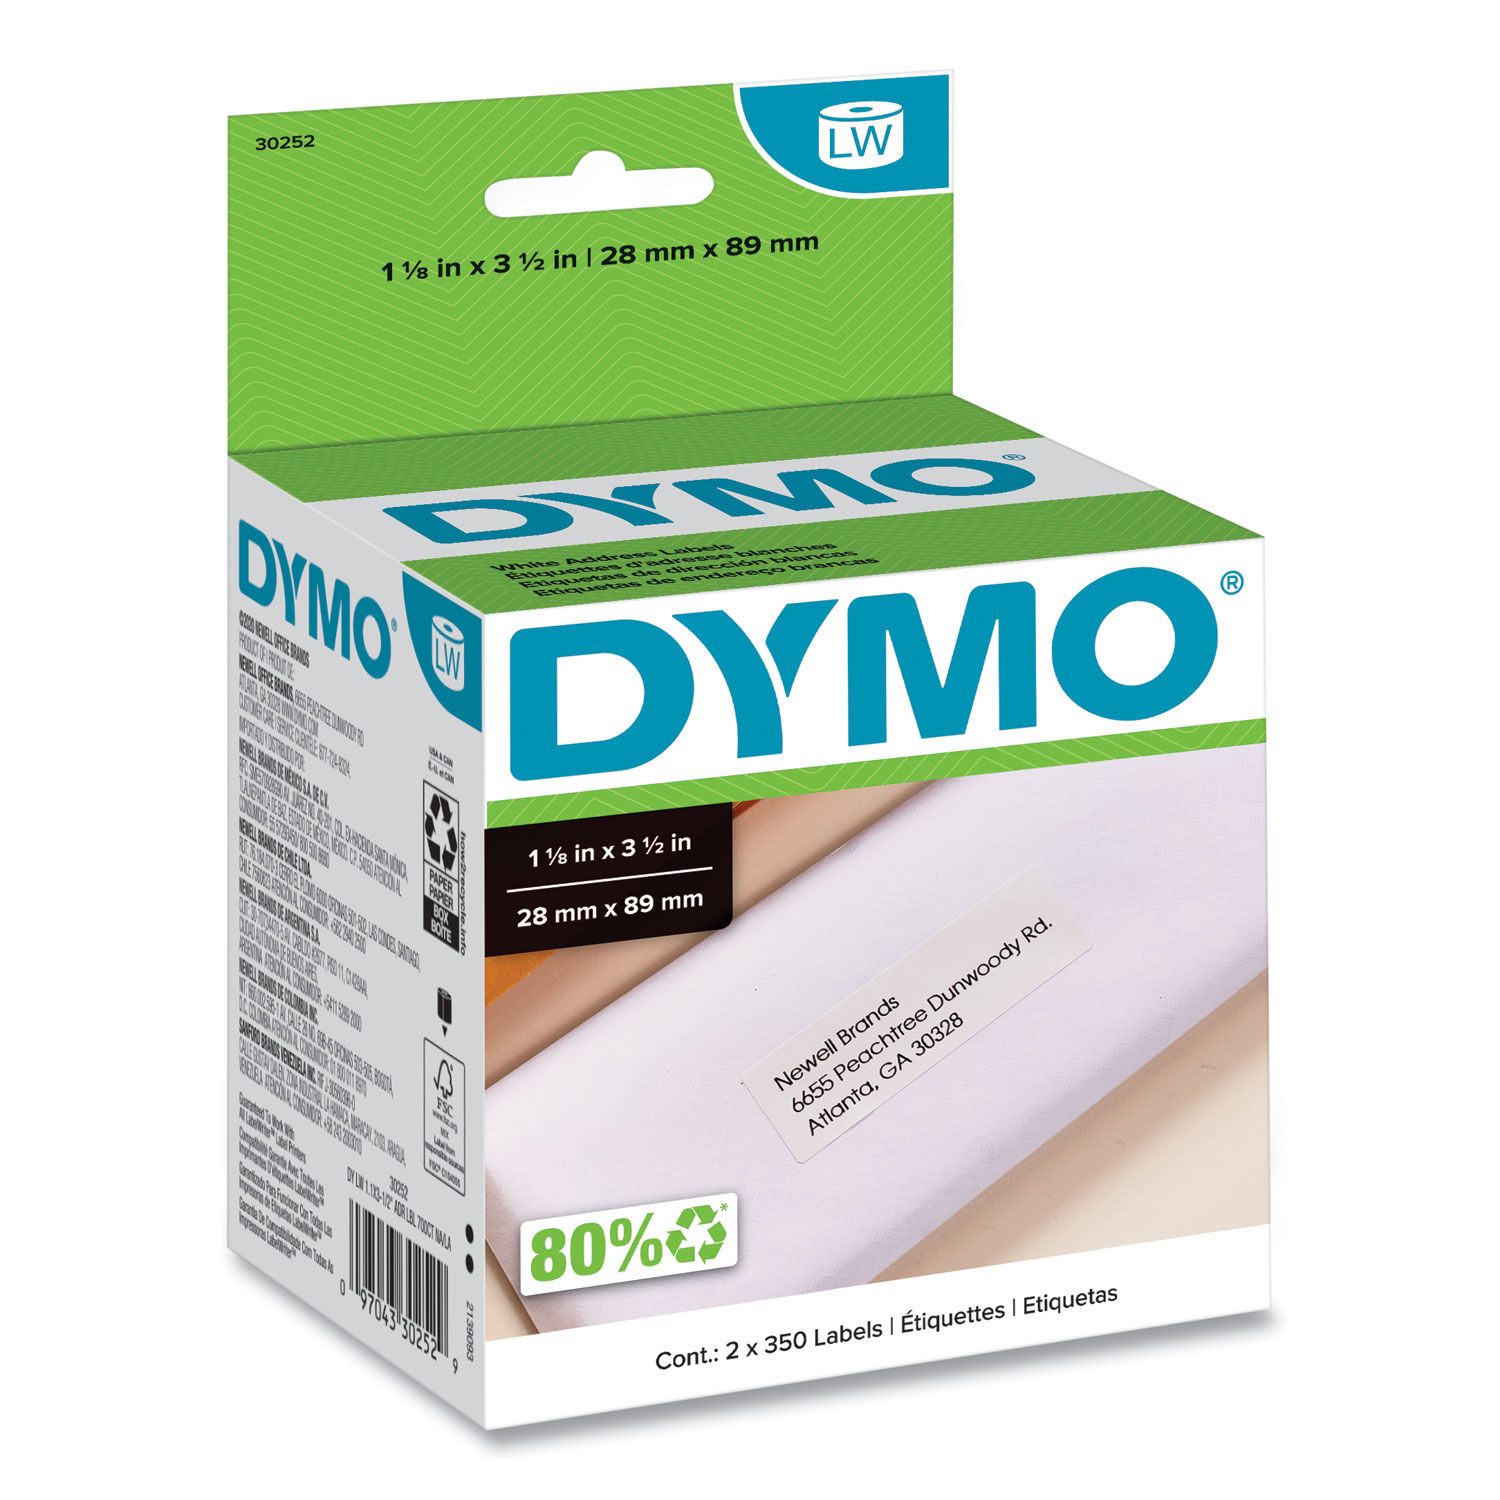 Dymo Name Badge Labels with Red Border 